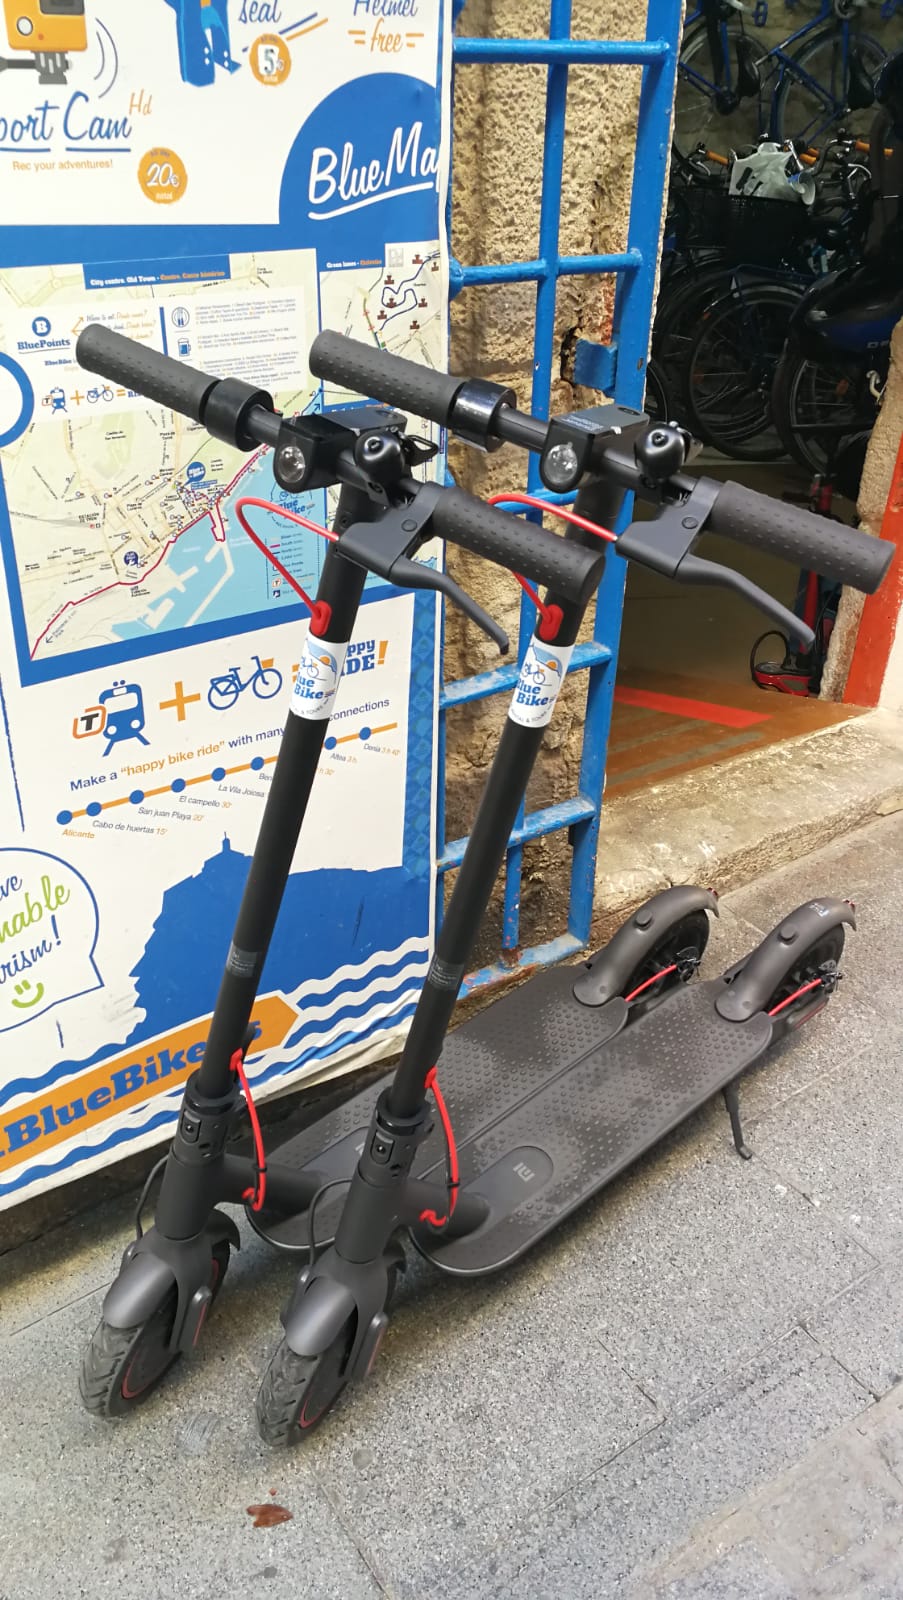 Negrita Diálogo Ciudadano NEW electric scooters for rent at the shop with 45km autonomy | Blue Bike